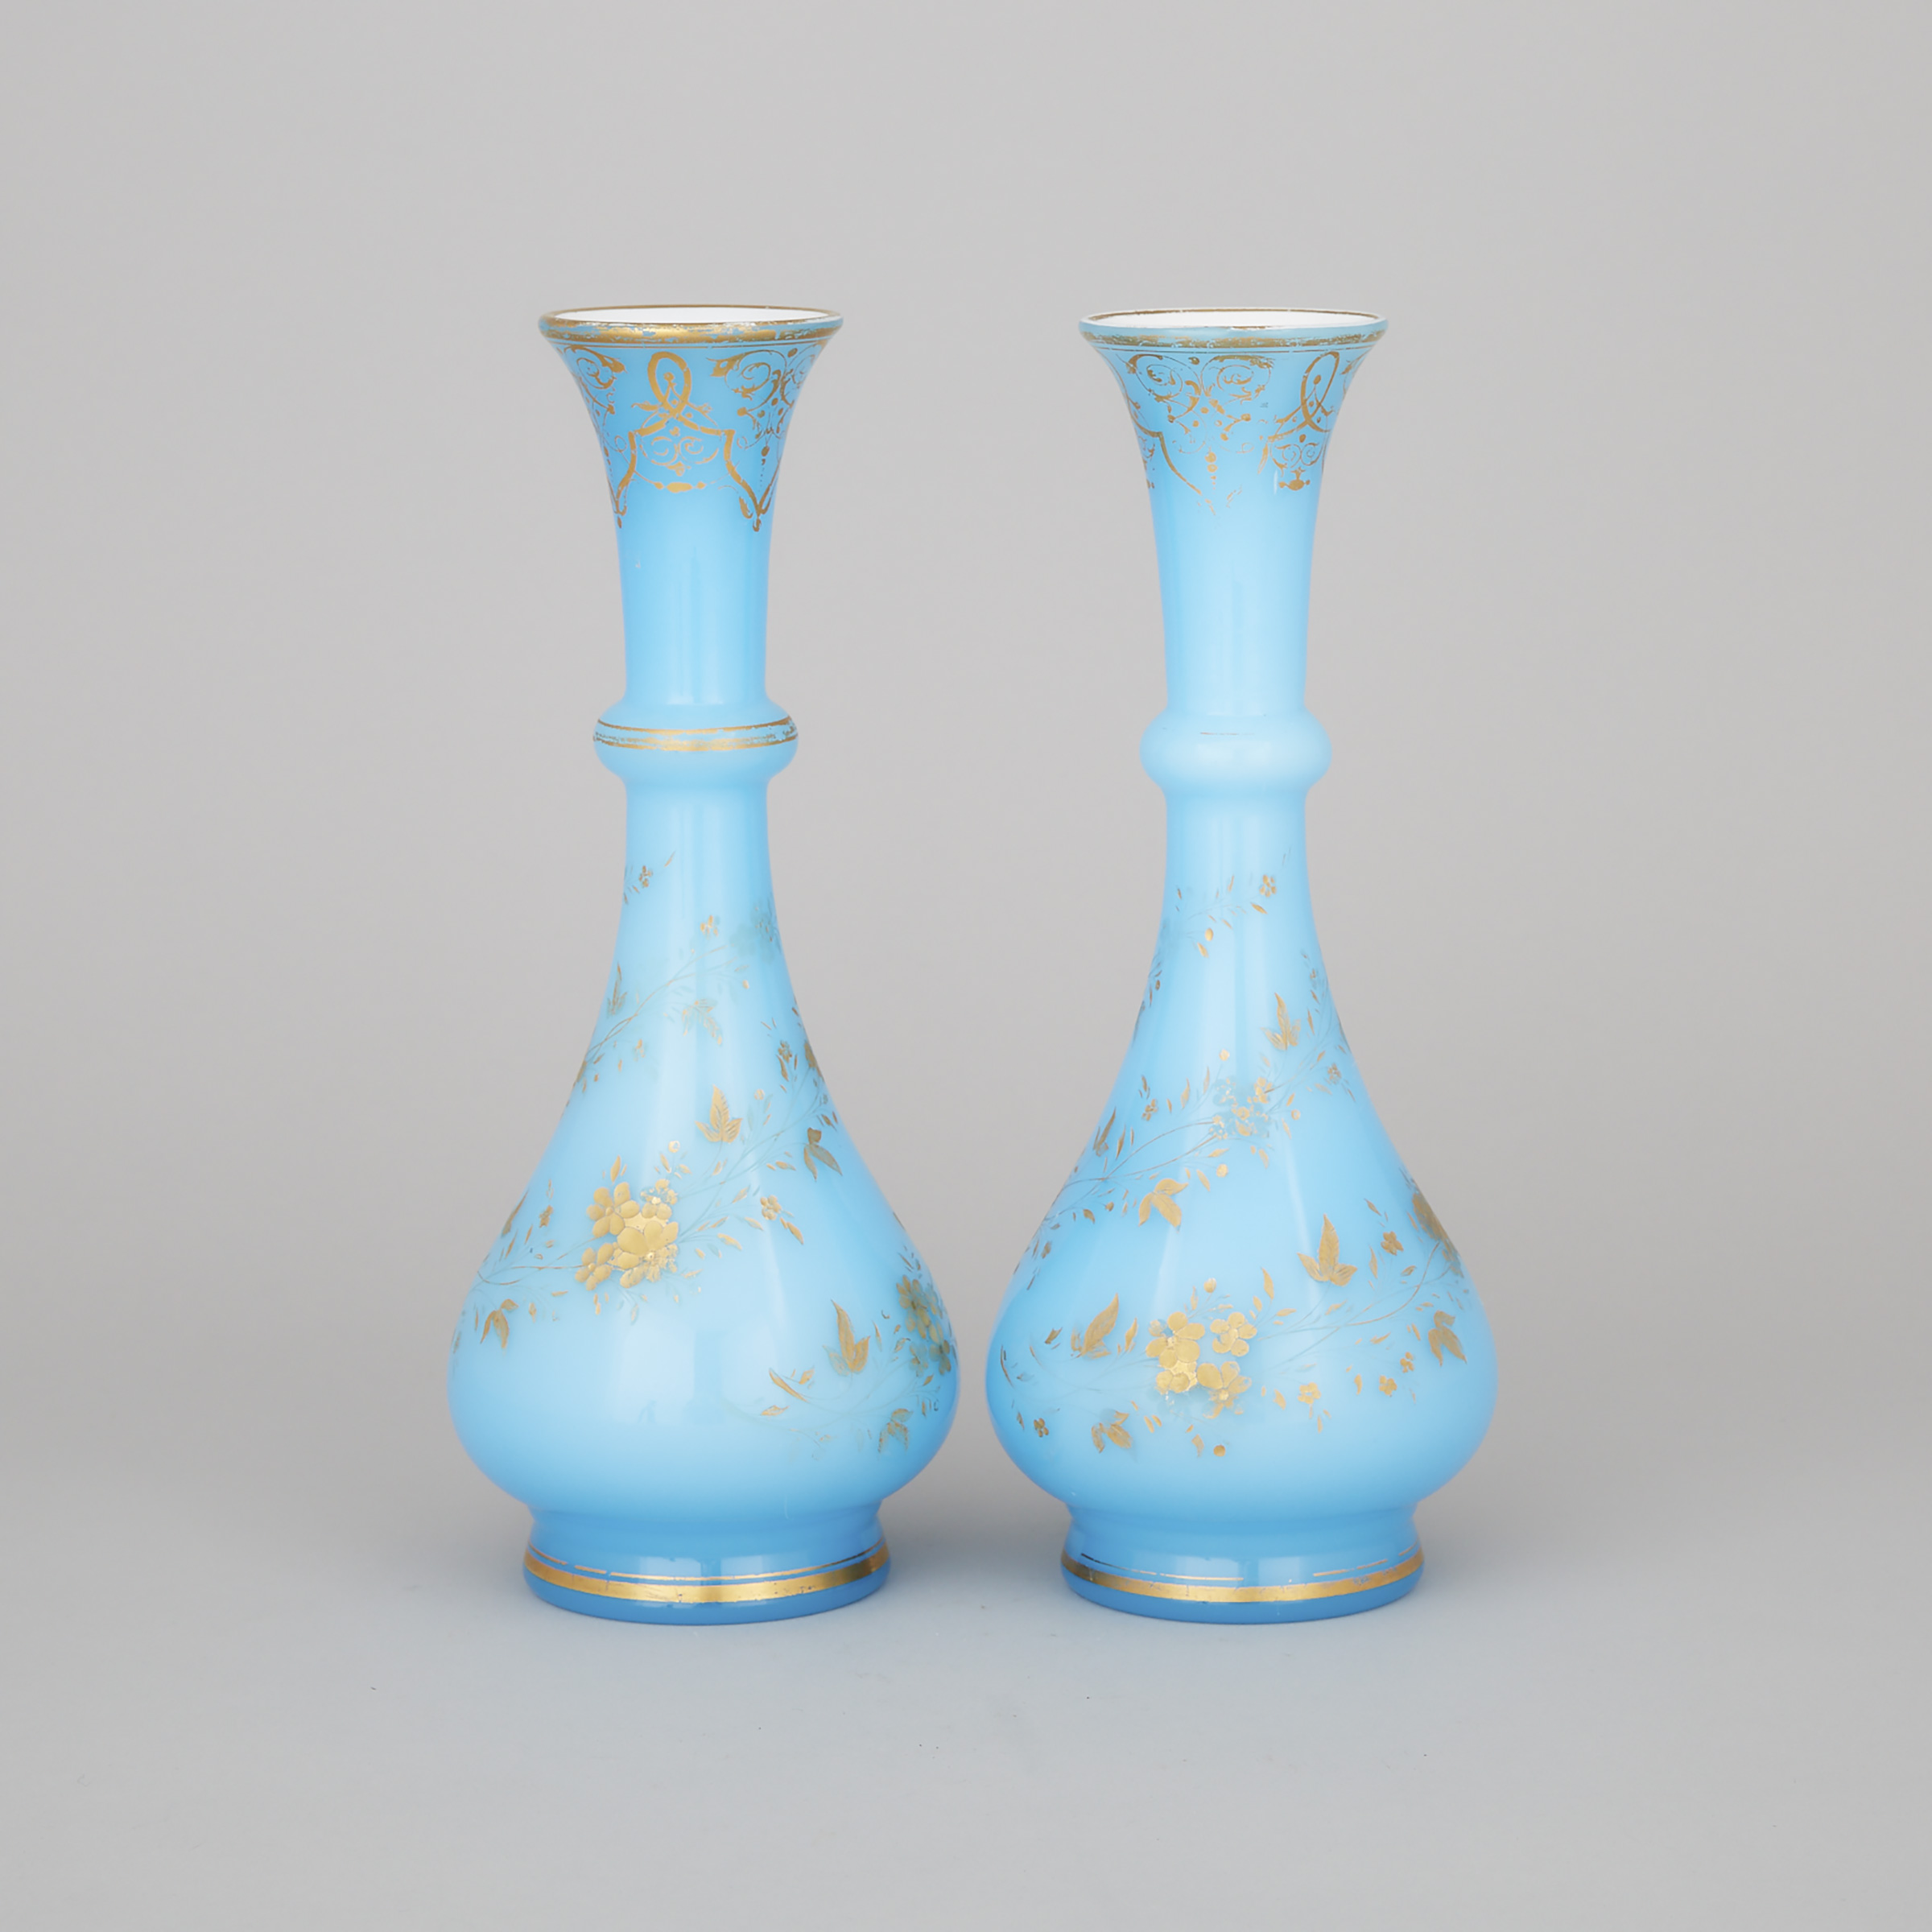 Pair of French Etched and Gilt Blue Opaline Glass Vases, 19th century